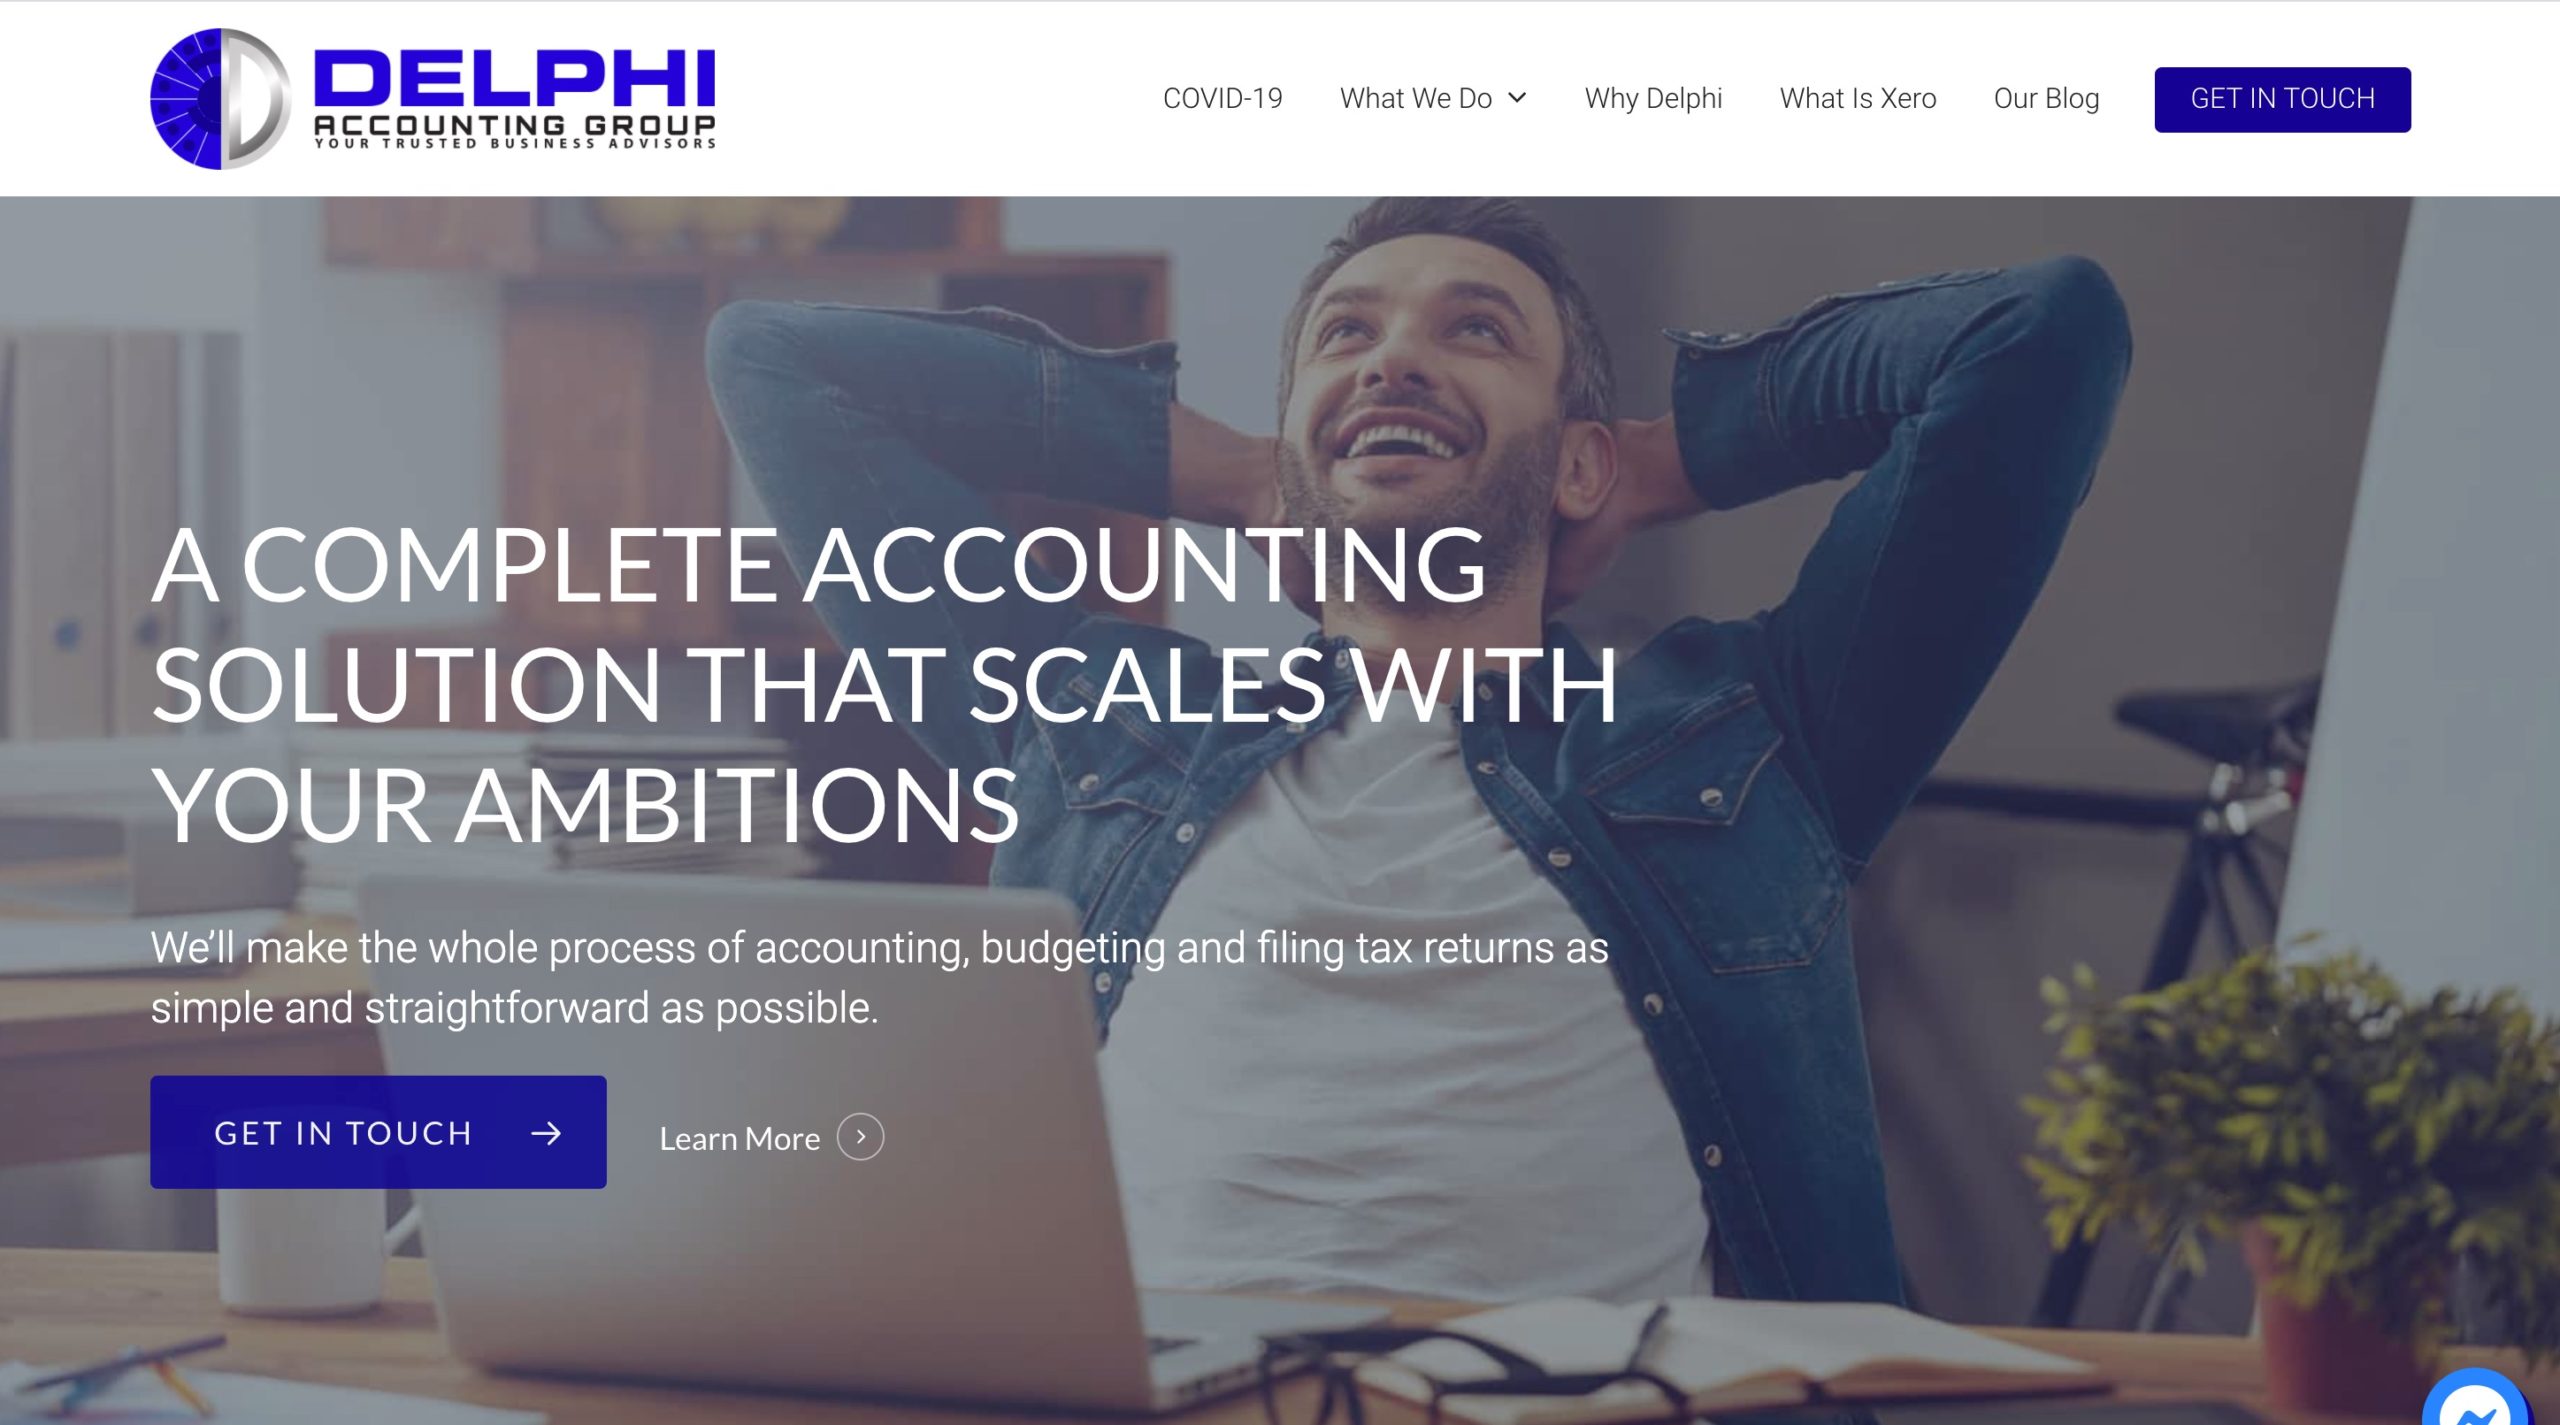 Delphi Accounting Group